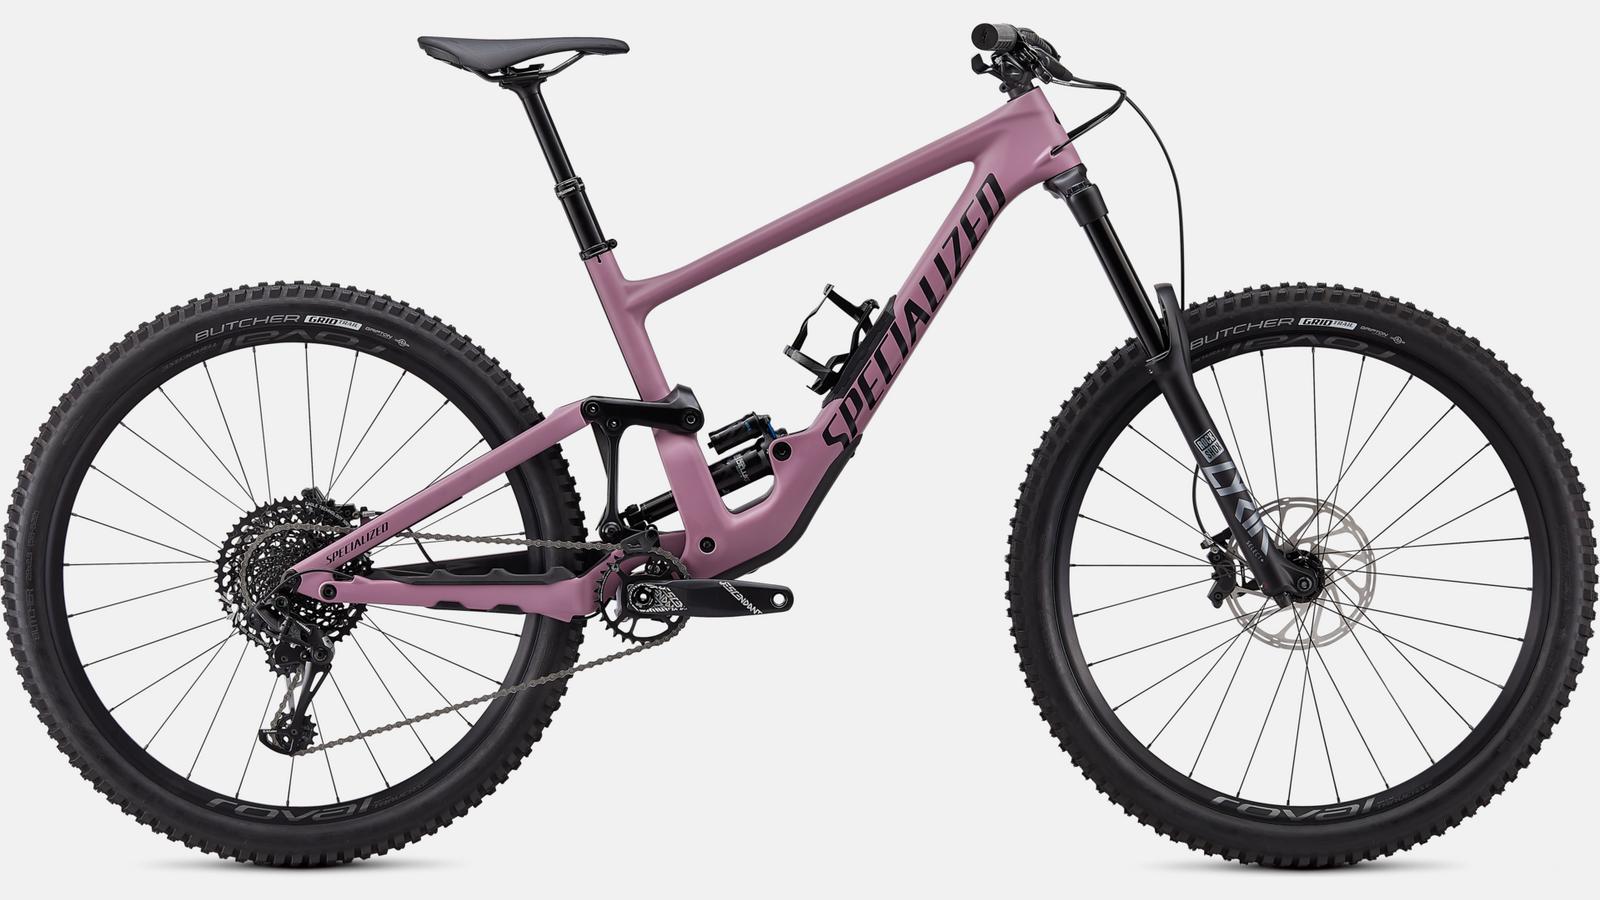 Paint for 2020 Specialized Enduro Elite - Satin Dusty Lilac